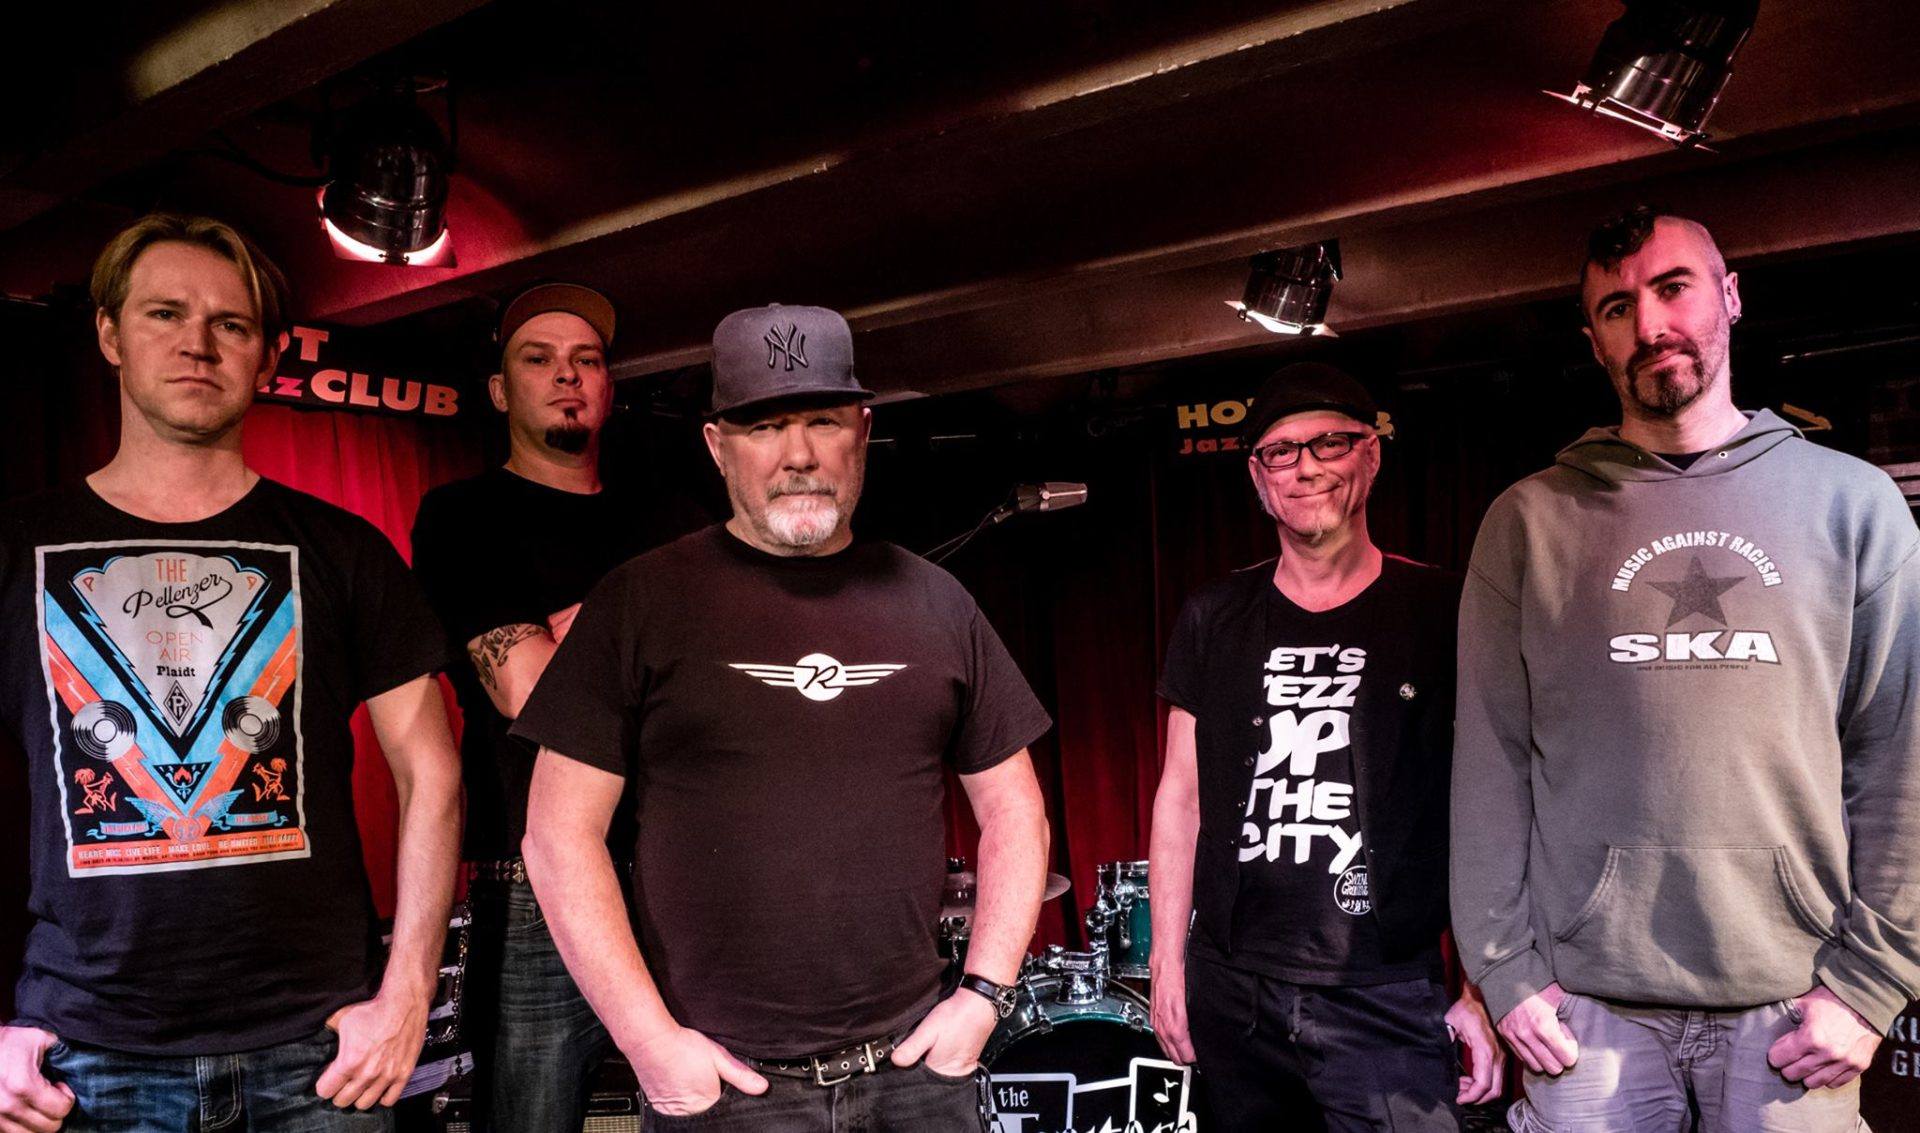 THE TOASTERS - The band that has defined the era of ska music | Hardwired  Magazine